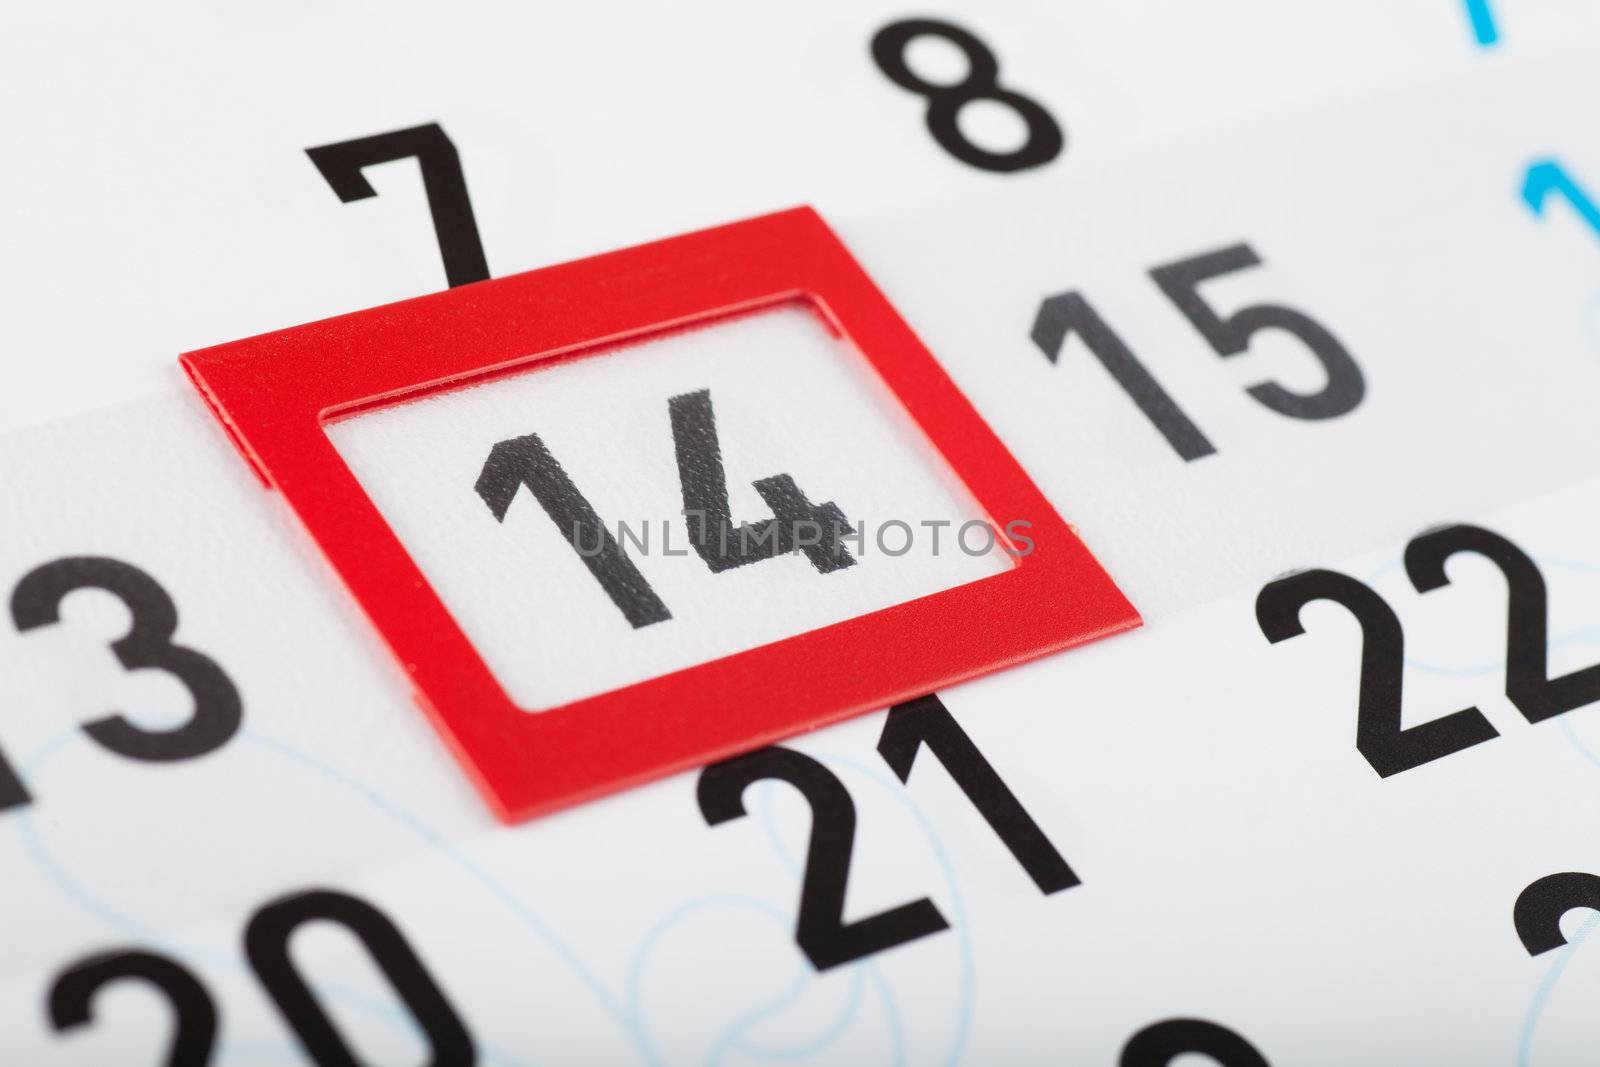 Sheet of wall calendar with red mark on Valentines day